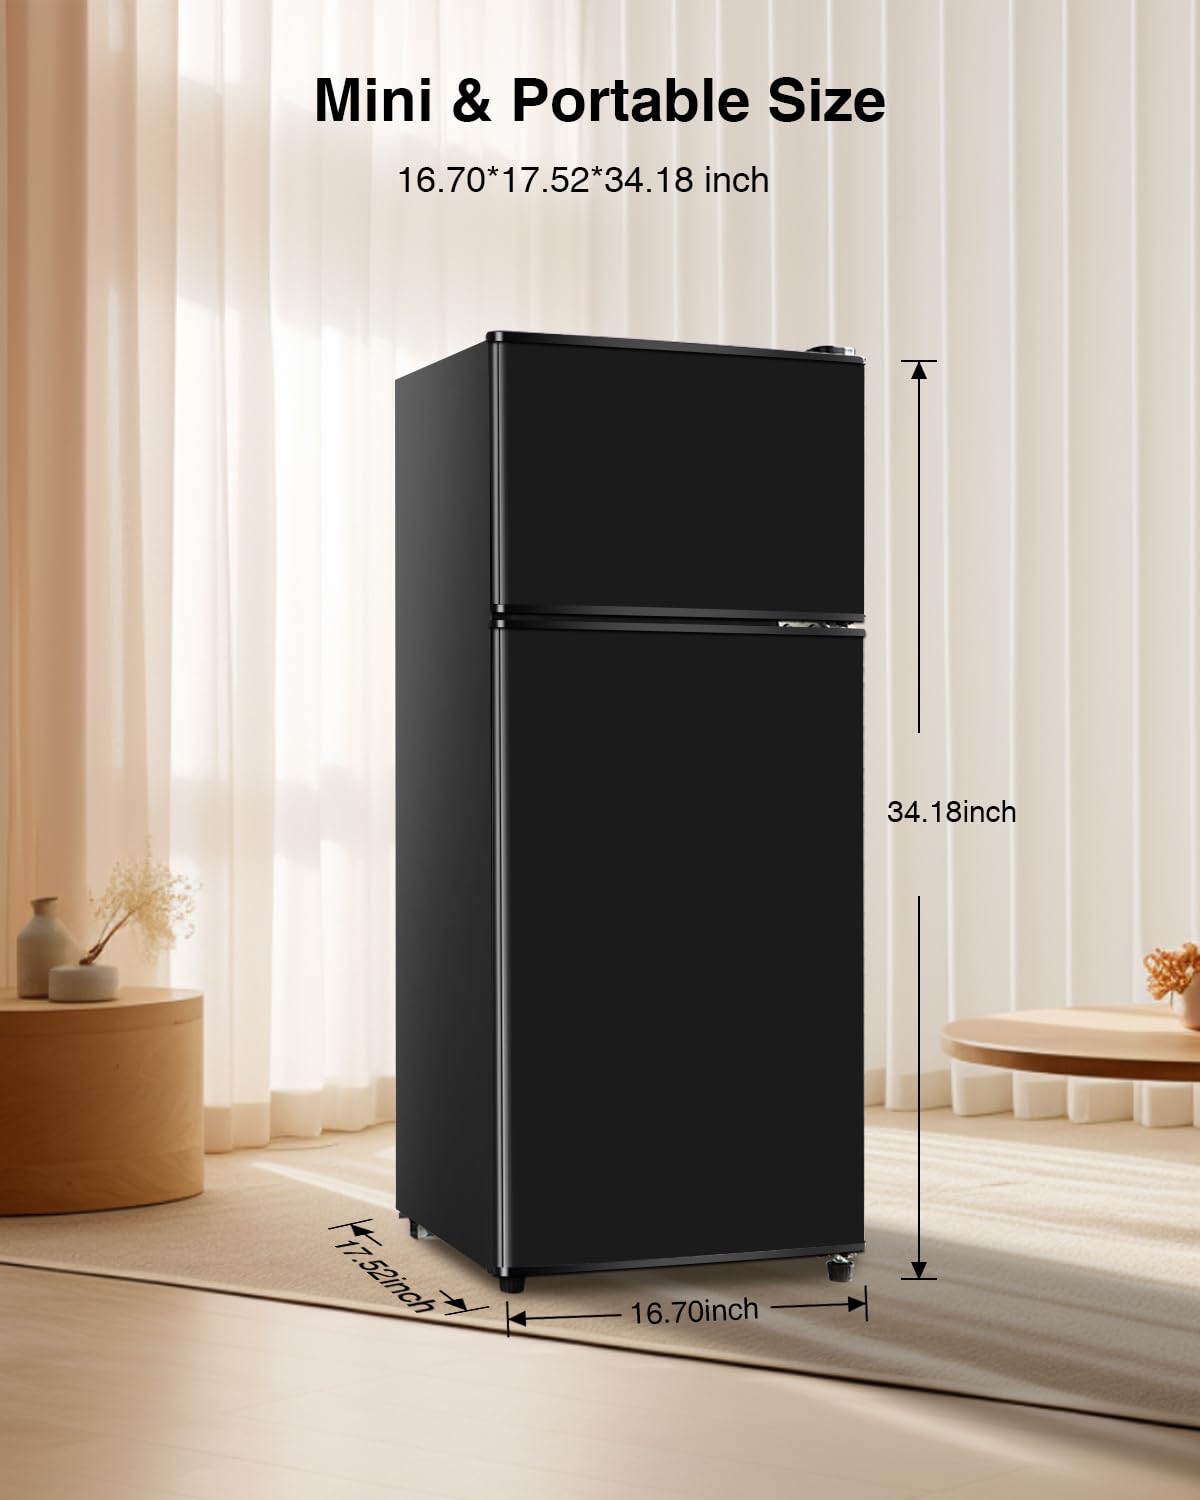 Geekman 3.5 Cu. Ft. Capacity Double-door Compact Fridge with Freezer and 7-Level Thermostat, Compact Convenience and Energy Savings, Ideal for Apartments, Dorms, Home Offices and Bars, Black Color